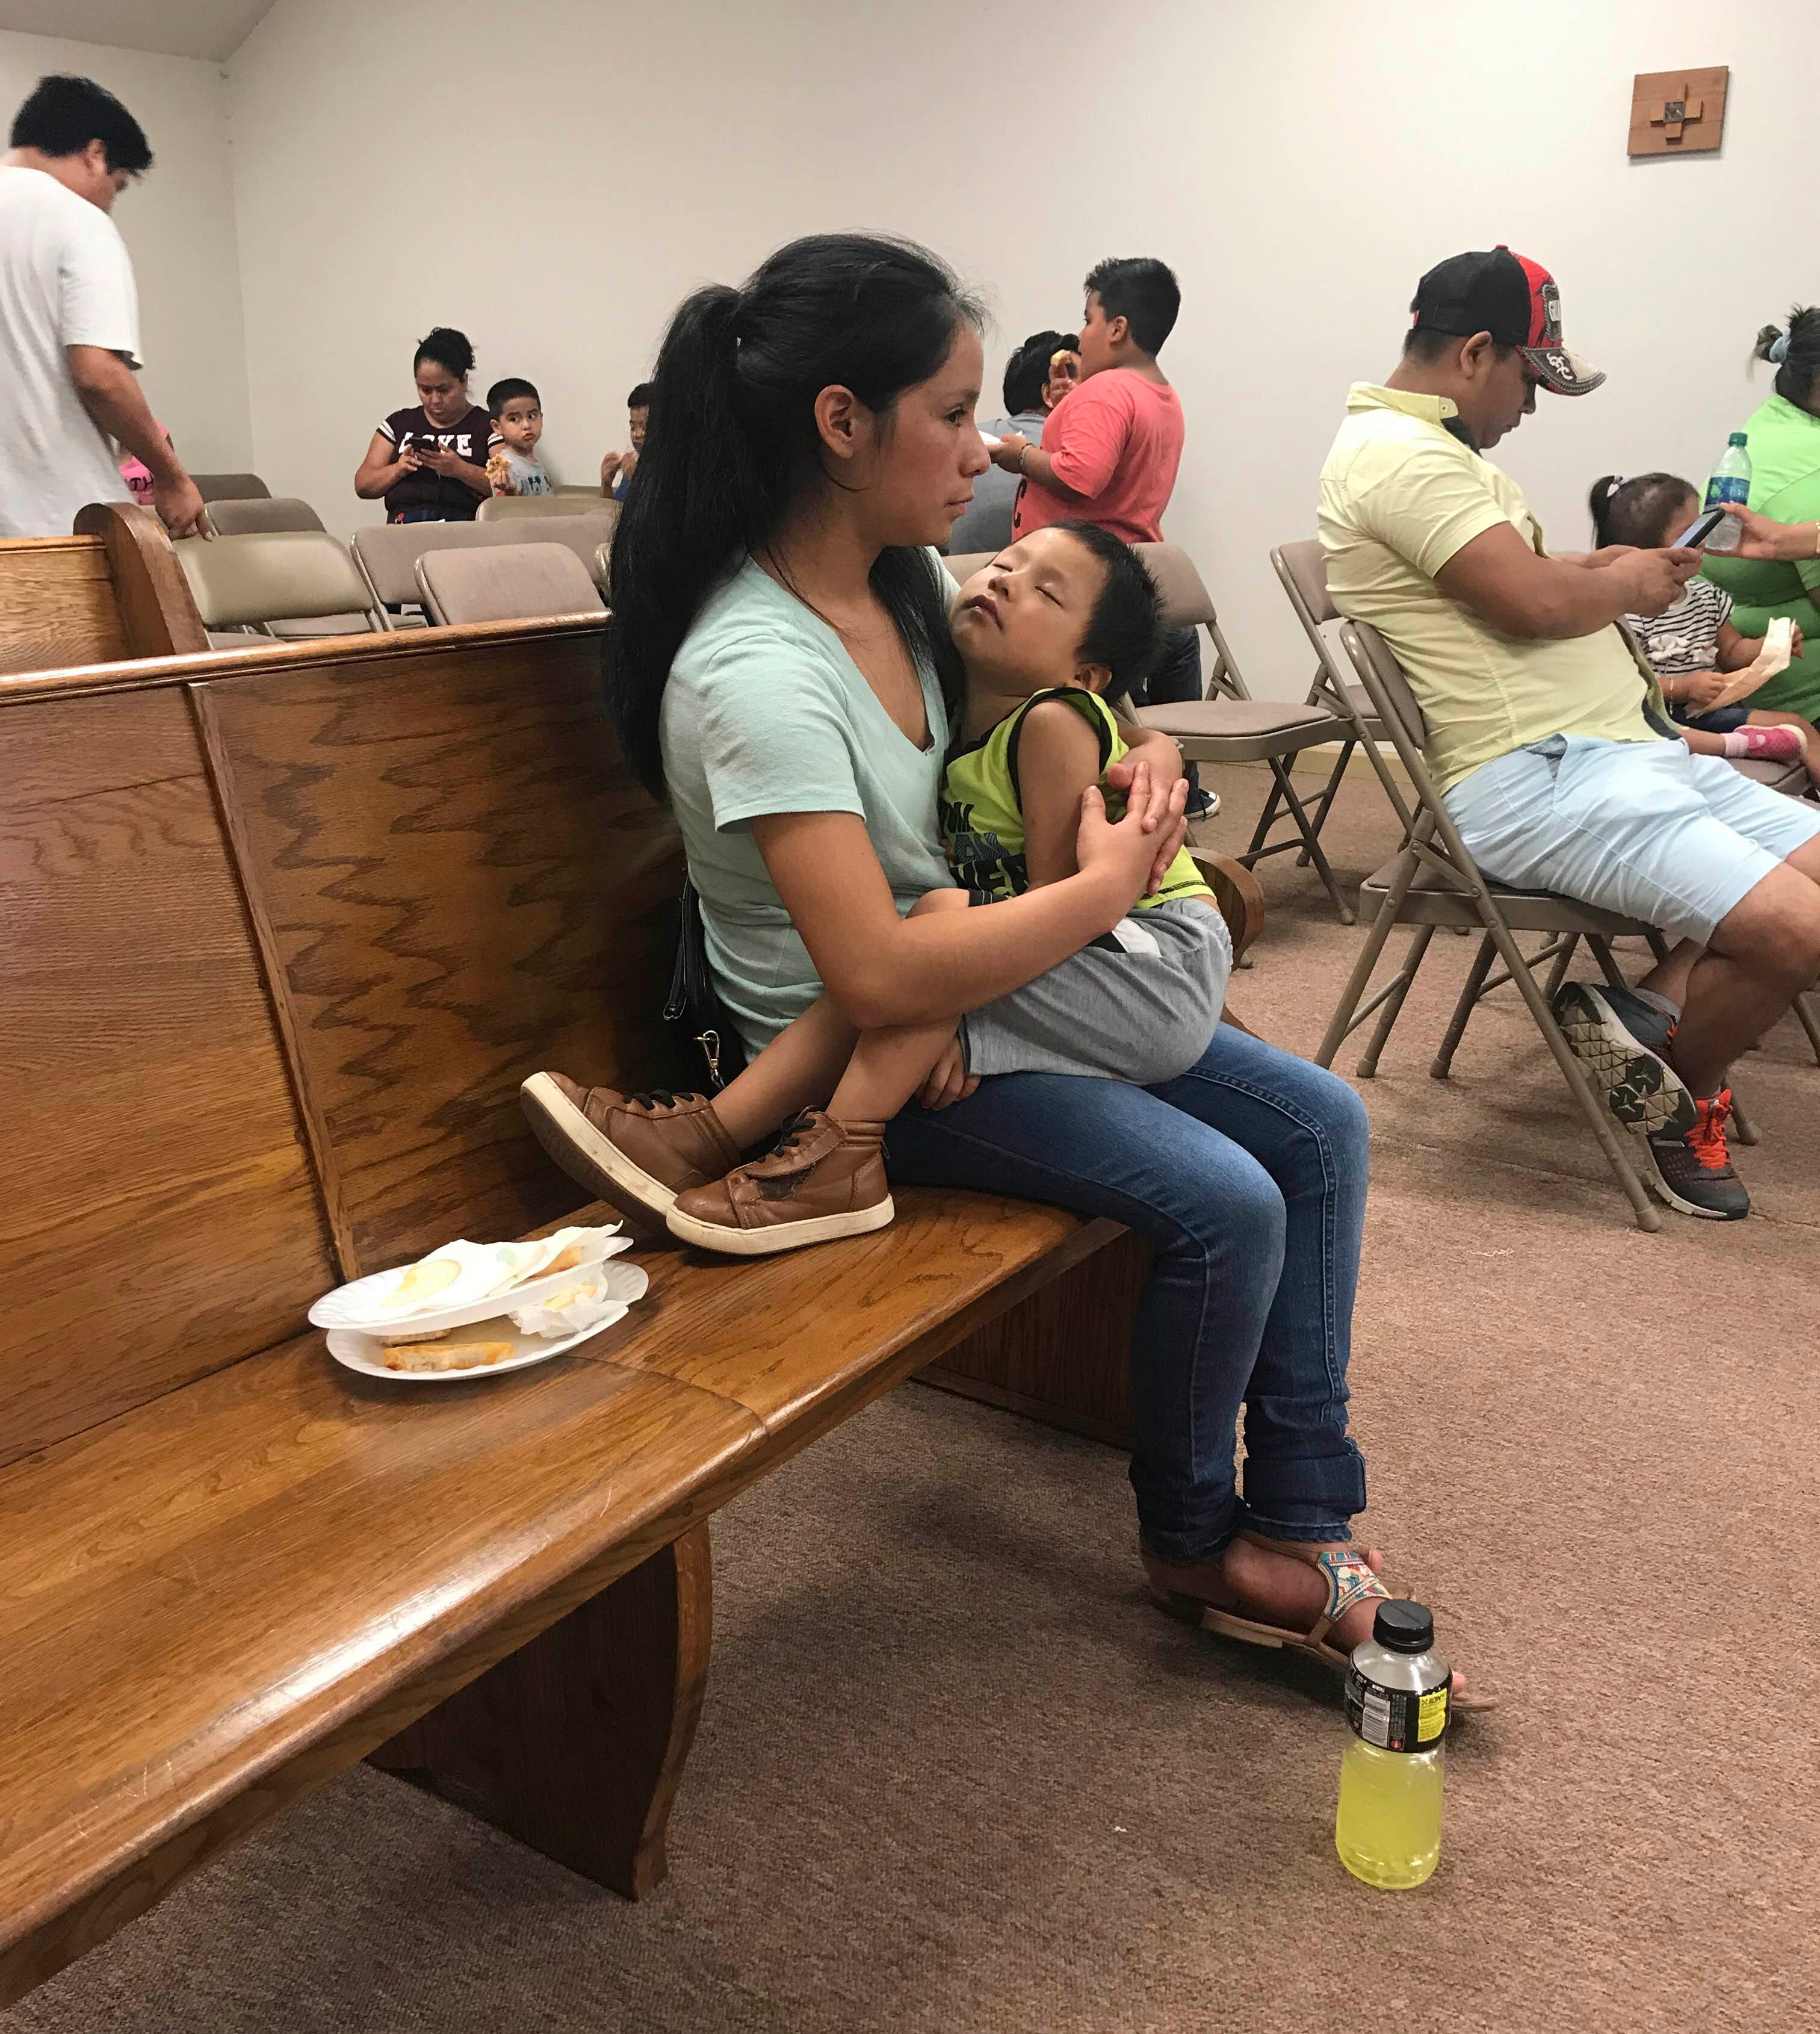 Workers from PH Foods and their supporters wait to speak to lawyers at St. Martin de Porres Catholic Church on Aug. 13, 2019, in Morton, Miss., days after federal agents arrested 99 people there for immigration violations.